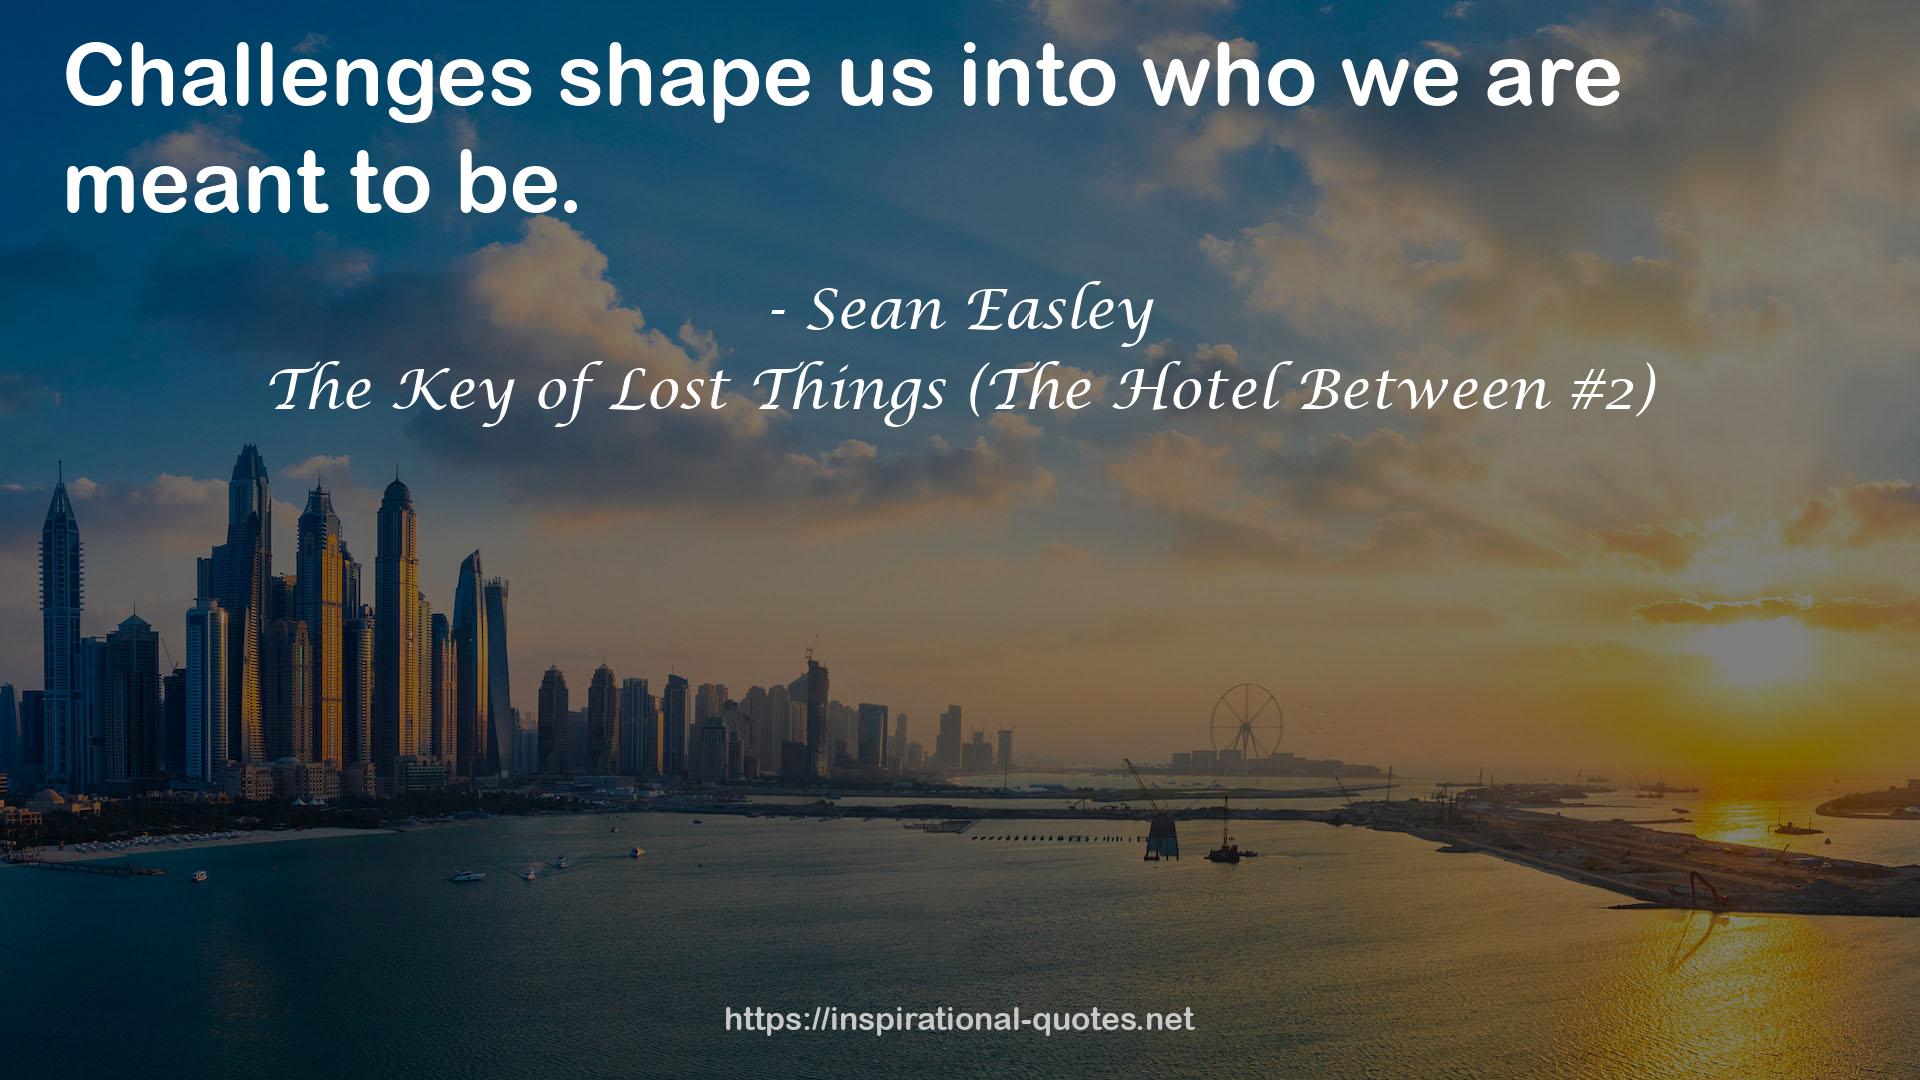 The Key of Lost Things (The Hotel Between #2) QUOTES